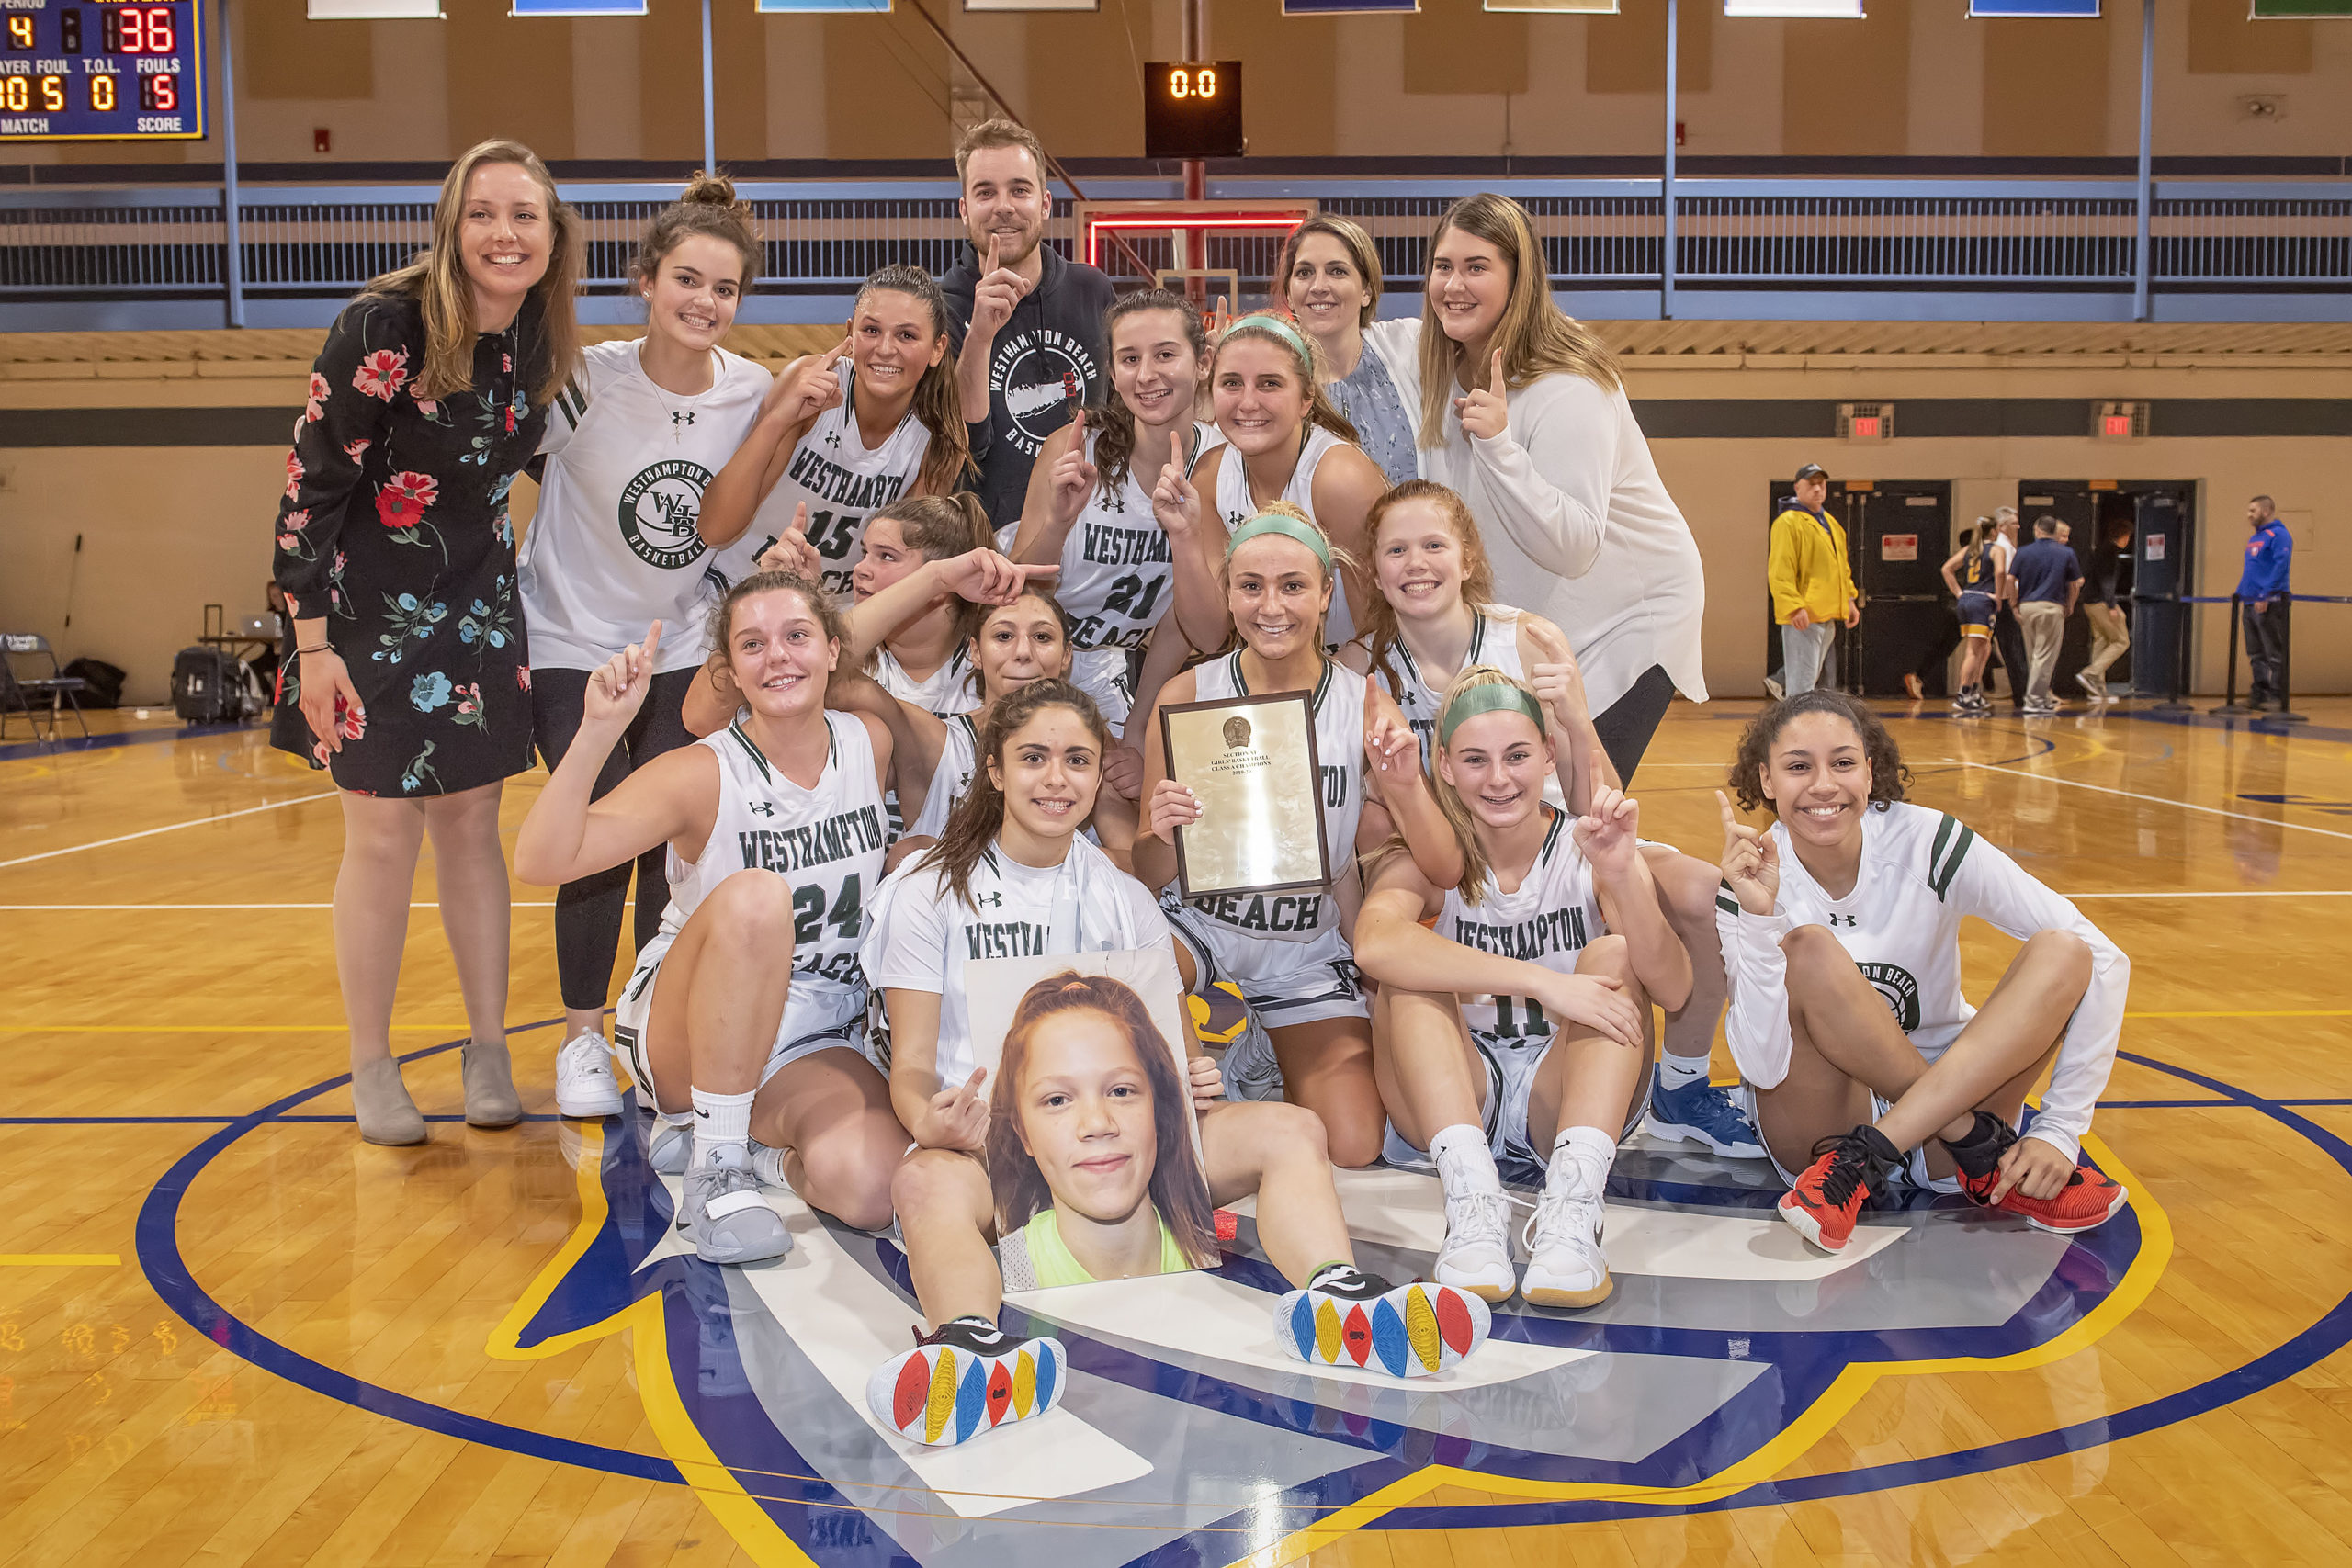 The Westhampton Beach girls basketball team defeated West Babylon, 38-36, on Tuesday night to win its first county title in 15 years.